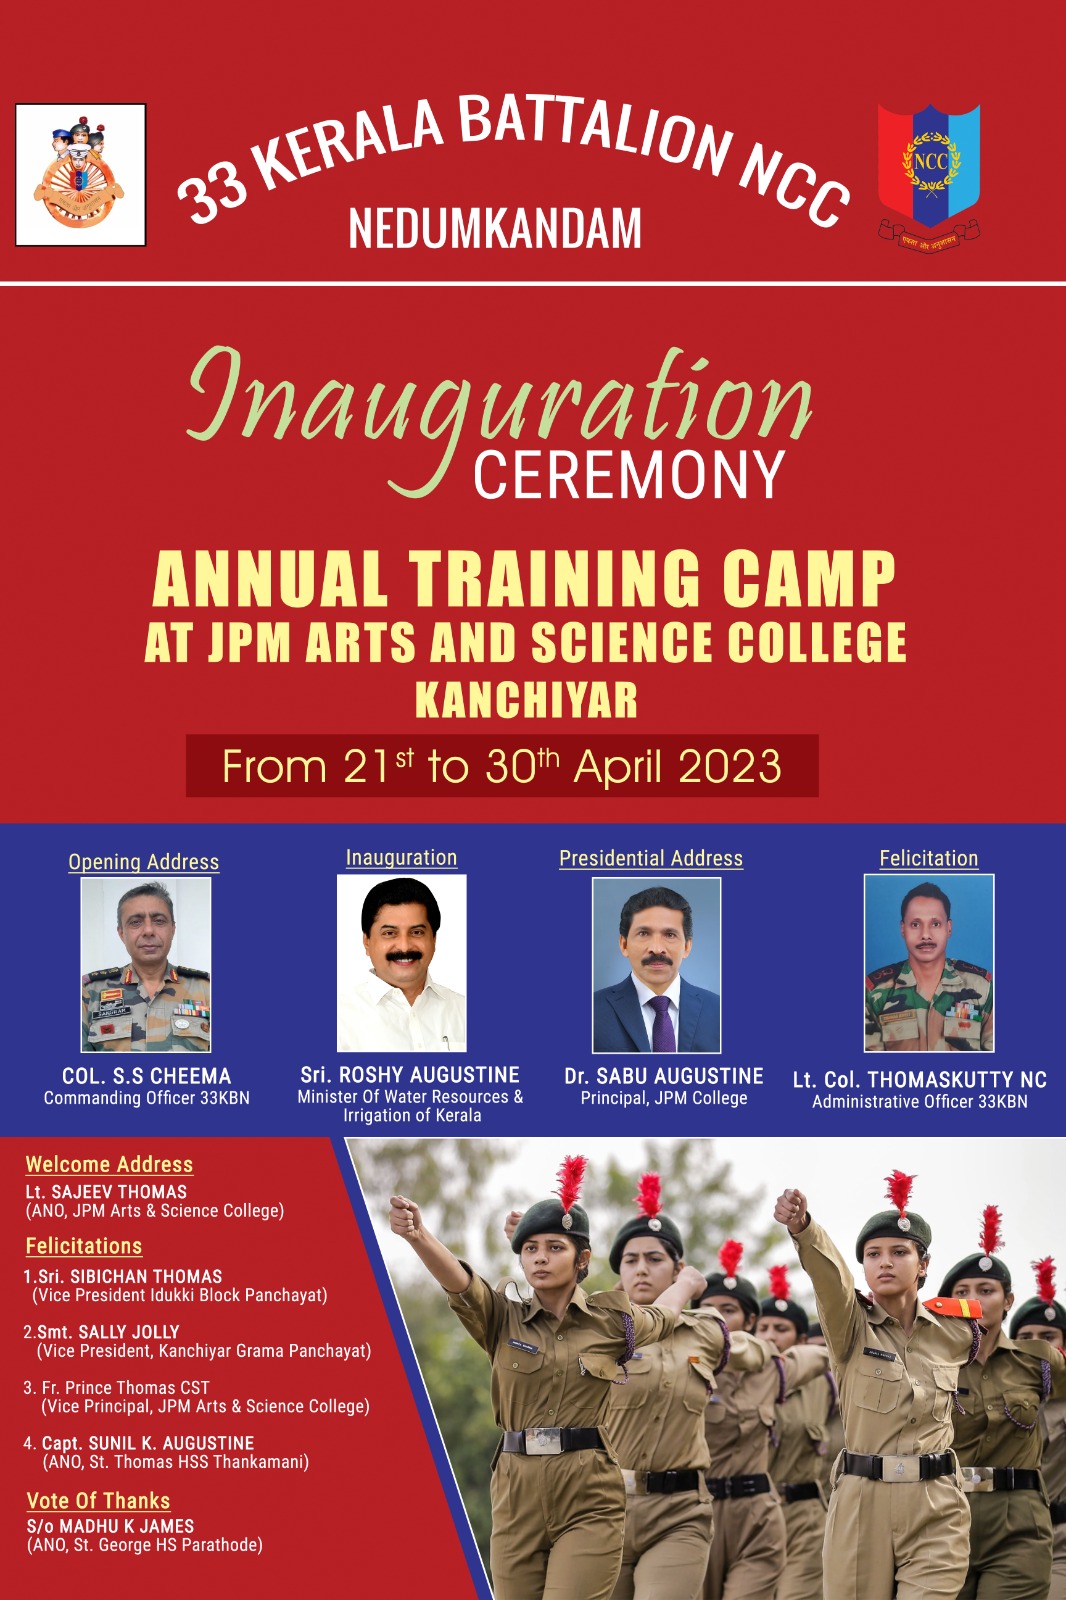 Inauguration Ceremony of Annual Training Camp at JPM Arts & Science College, Kanchiyar